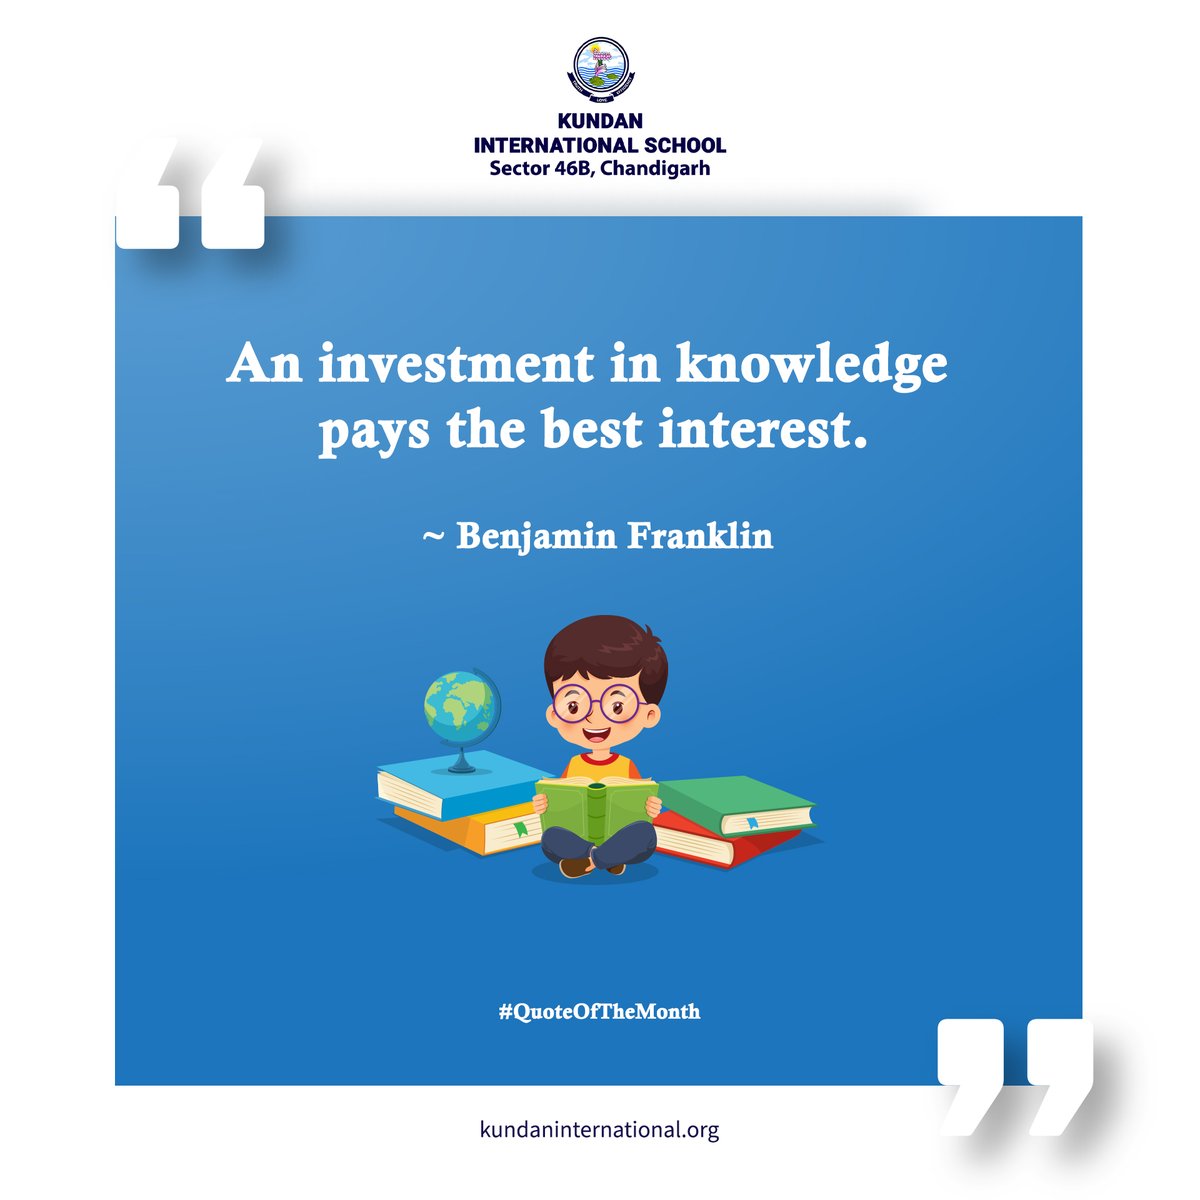 🌿Plant the seeds of knowledge today and watch as they grow into a forest of opportunity tomorrow📚💰

#QuoteOfTheMonth #InvestInKnowledge #KundanInternationalSchool #SchoolInChandigarh #Education #SchoolSpirit #BlendedLearning #Curriculum #EducationIsTheKey #SchoolLife